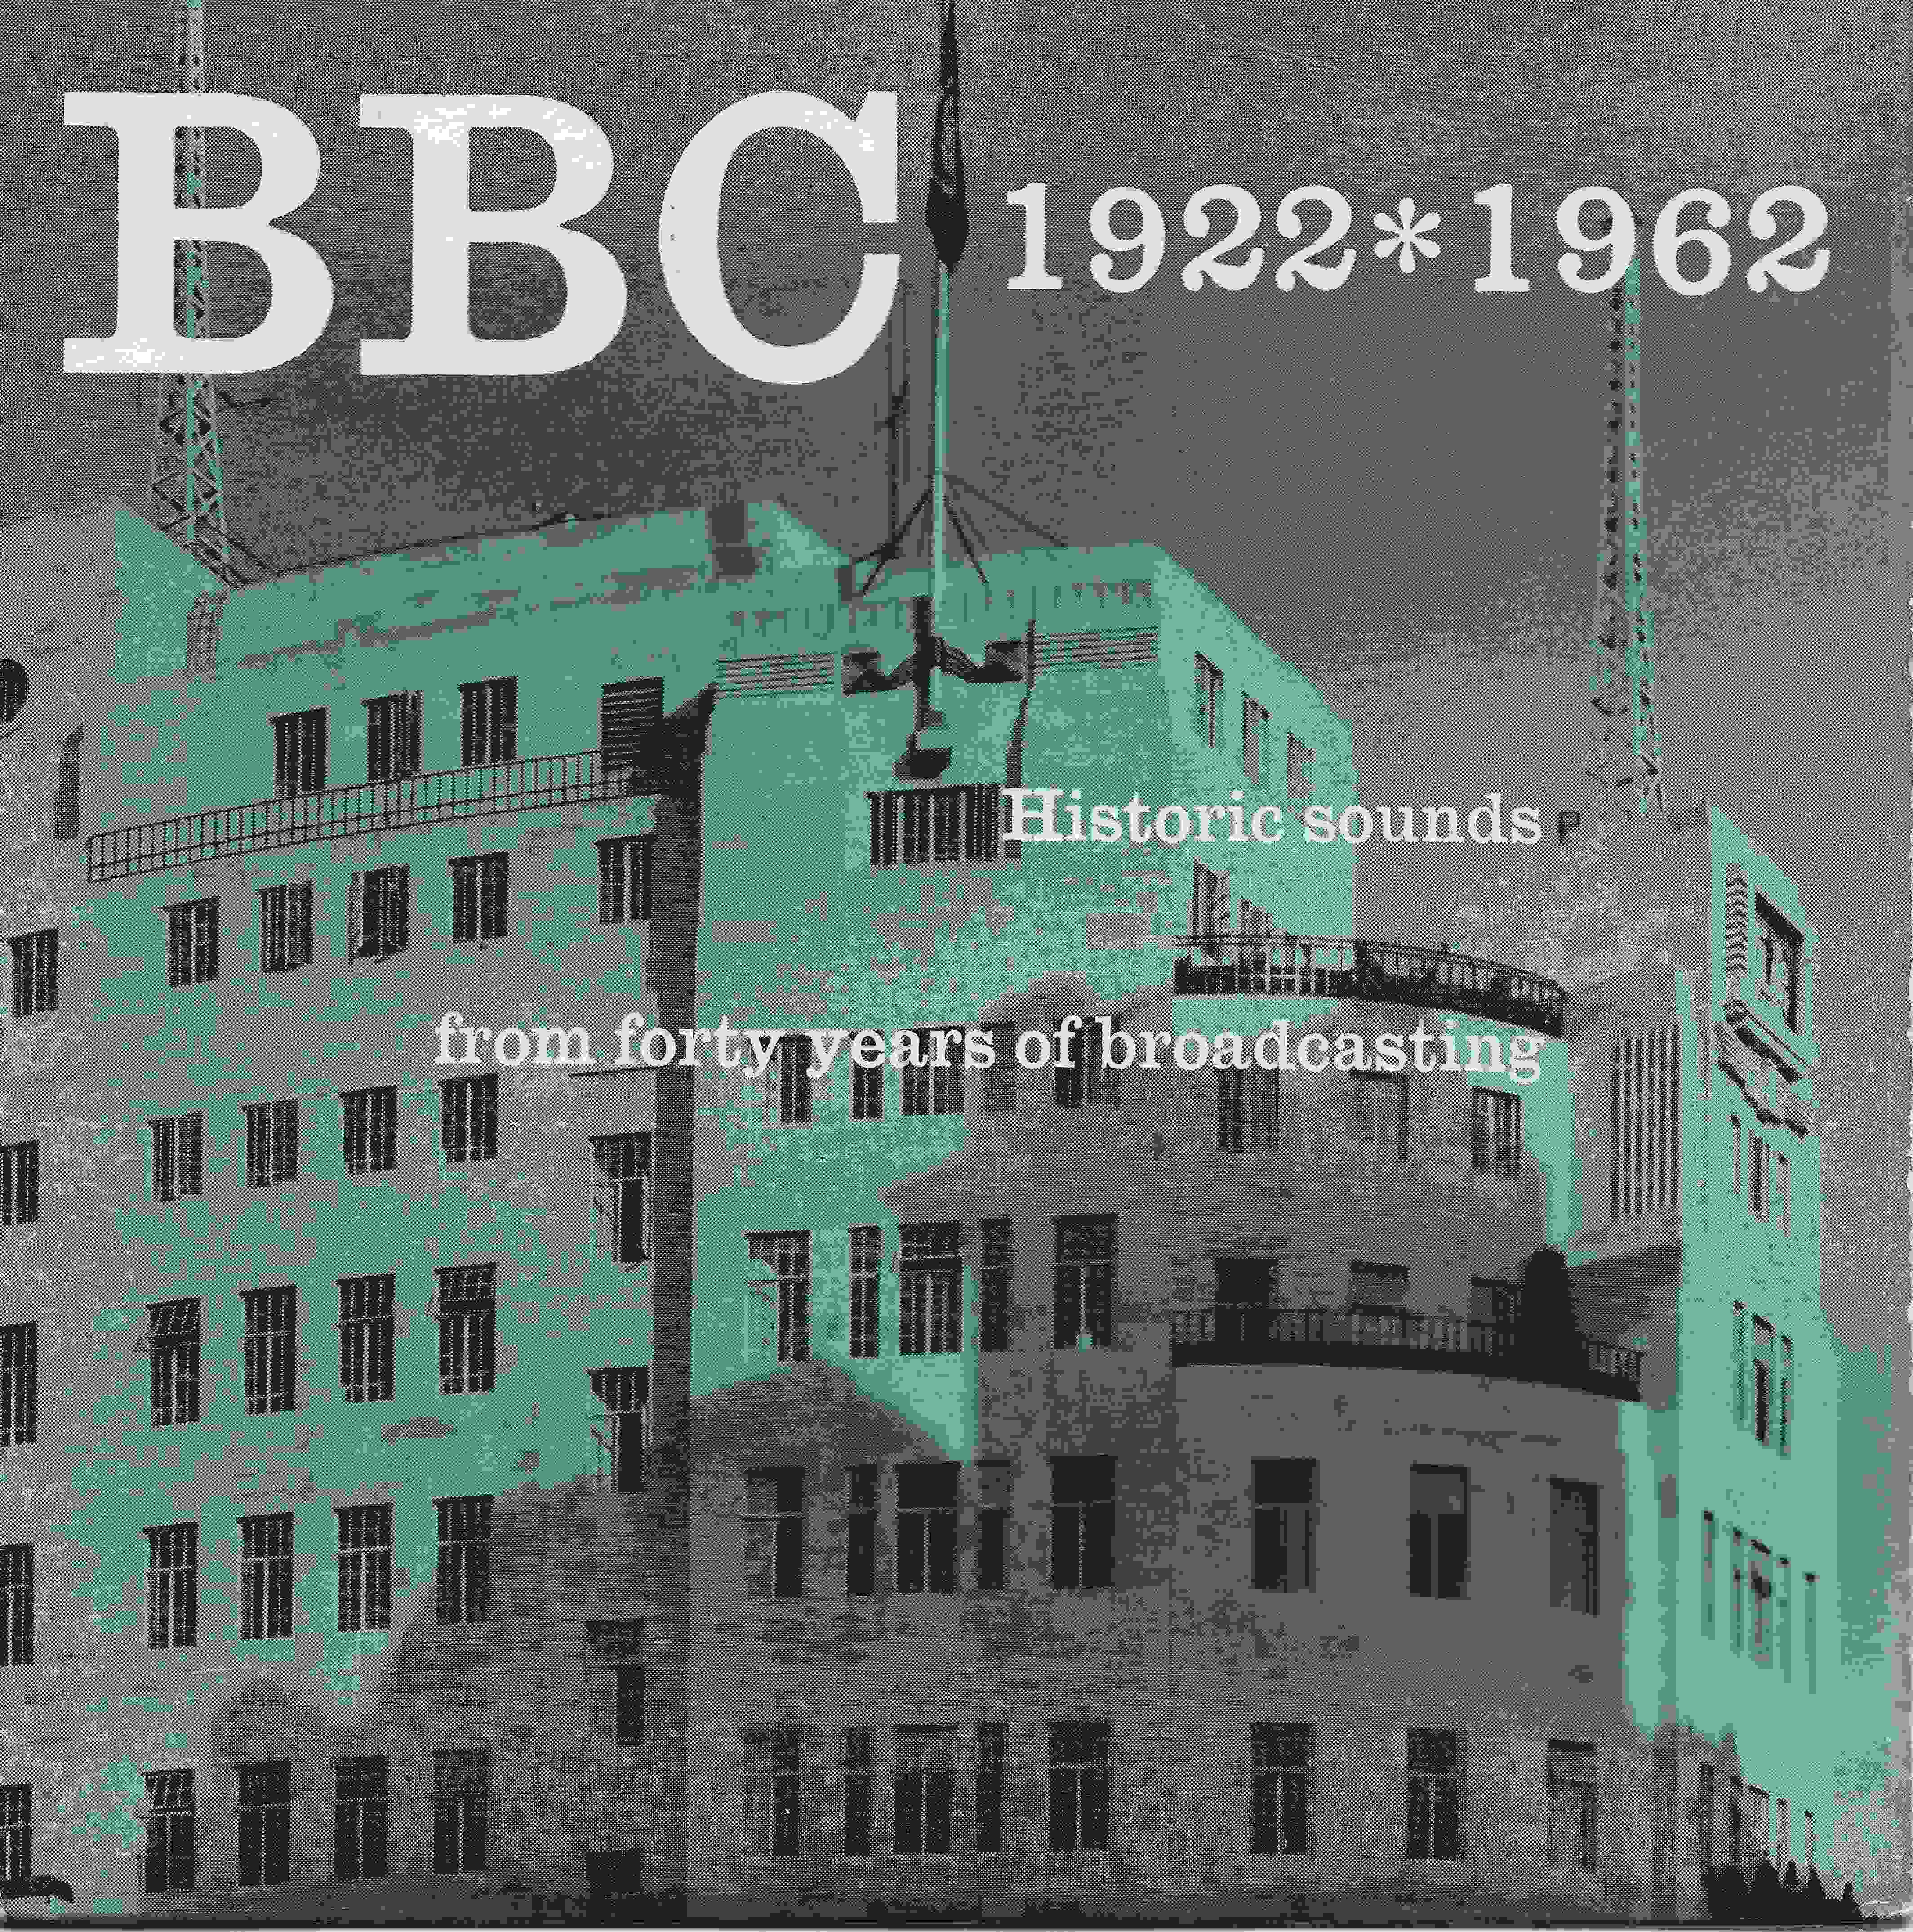 Picture of PD 1 BBC 1922*1962 - Historic sounds from forty years of broadcasting by artist Various from the BBC singles - Records and Tapes library